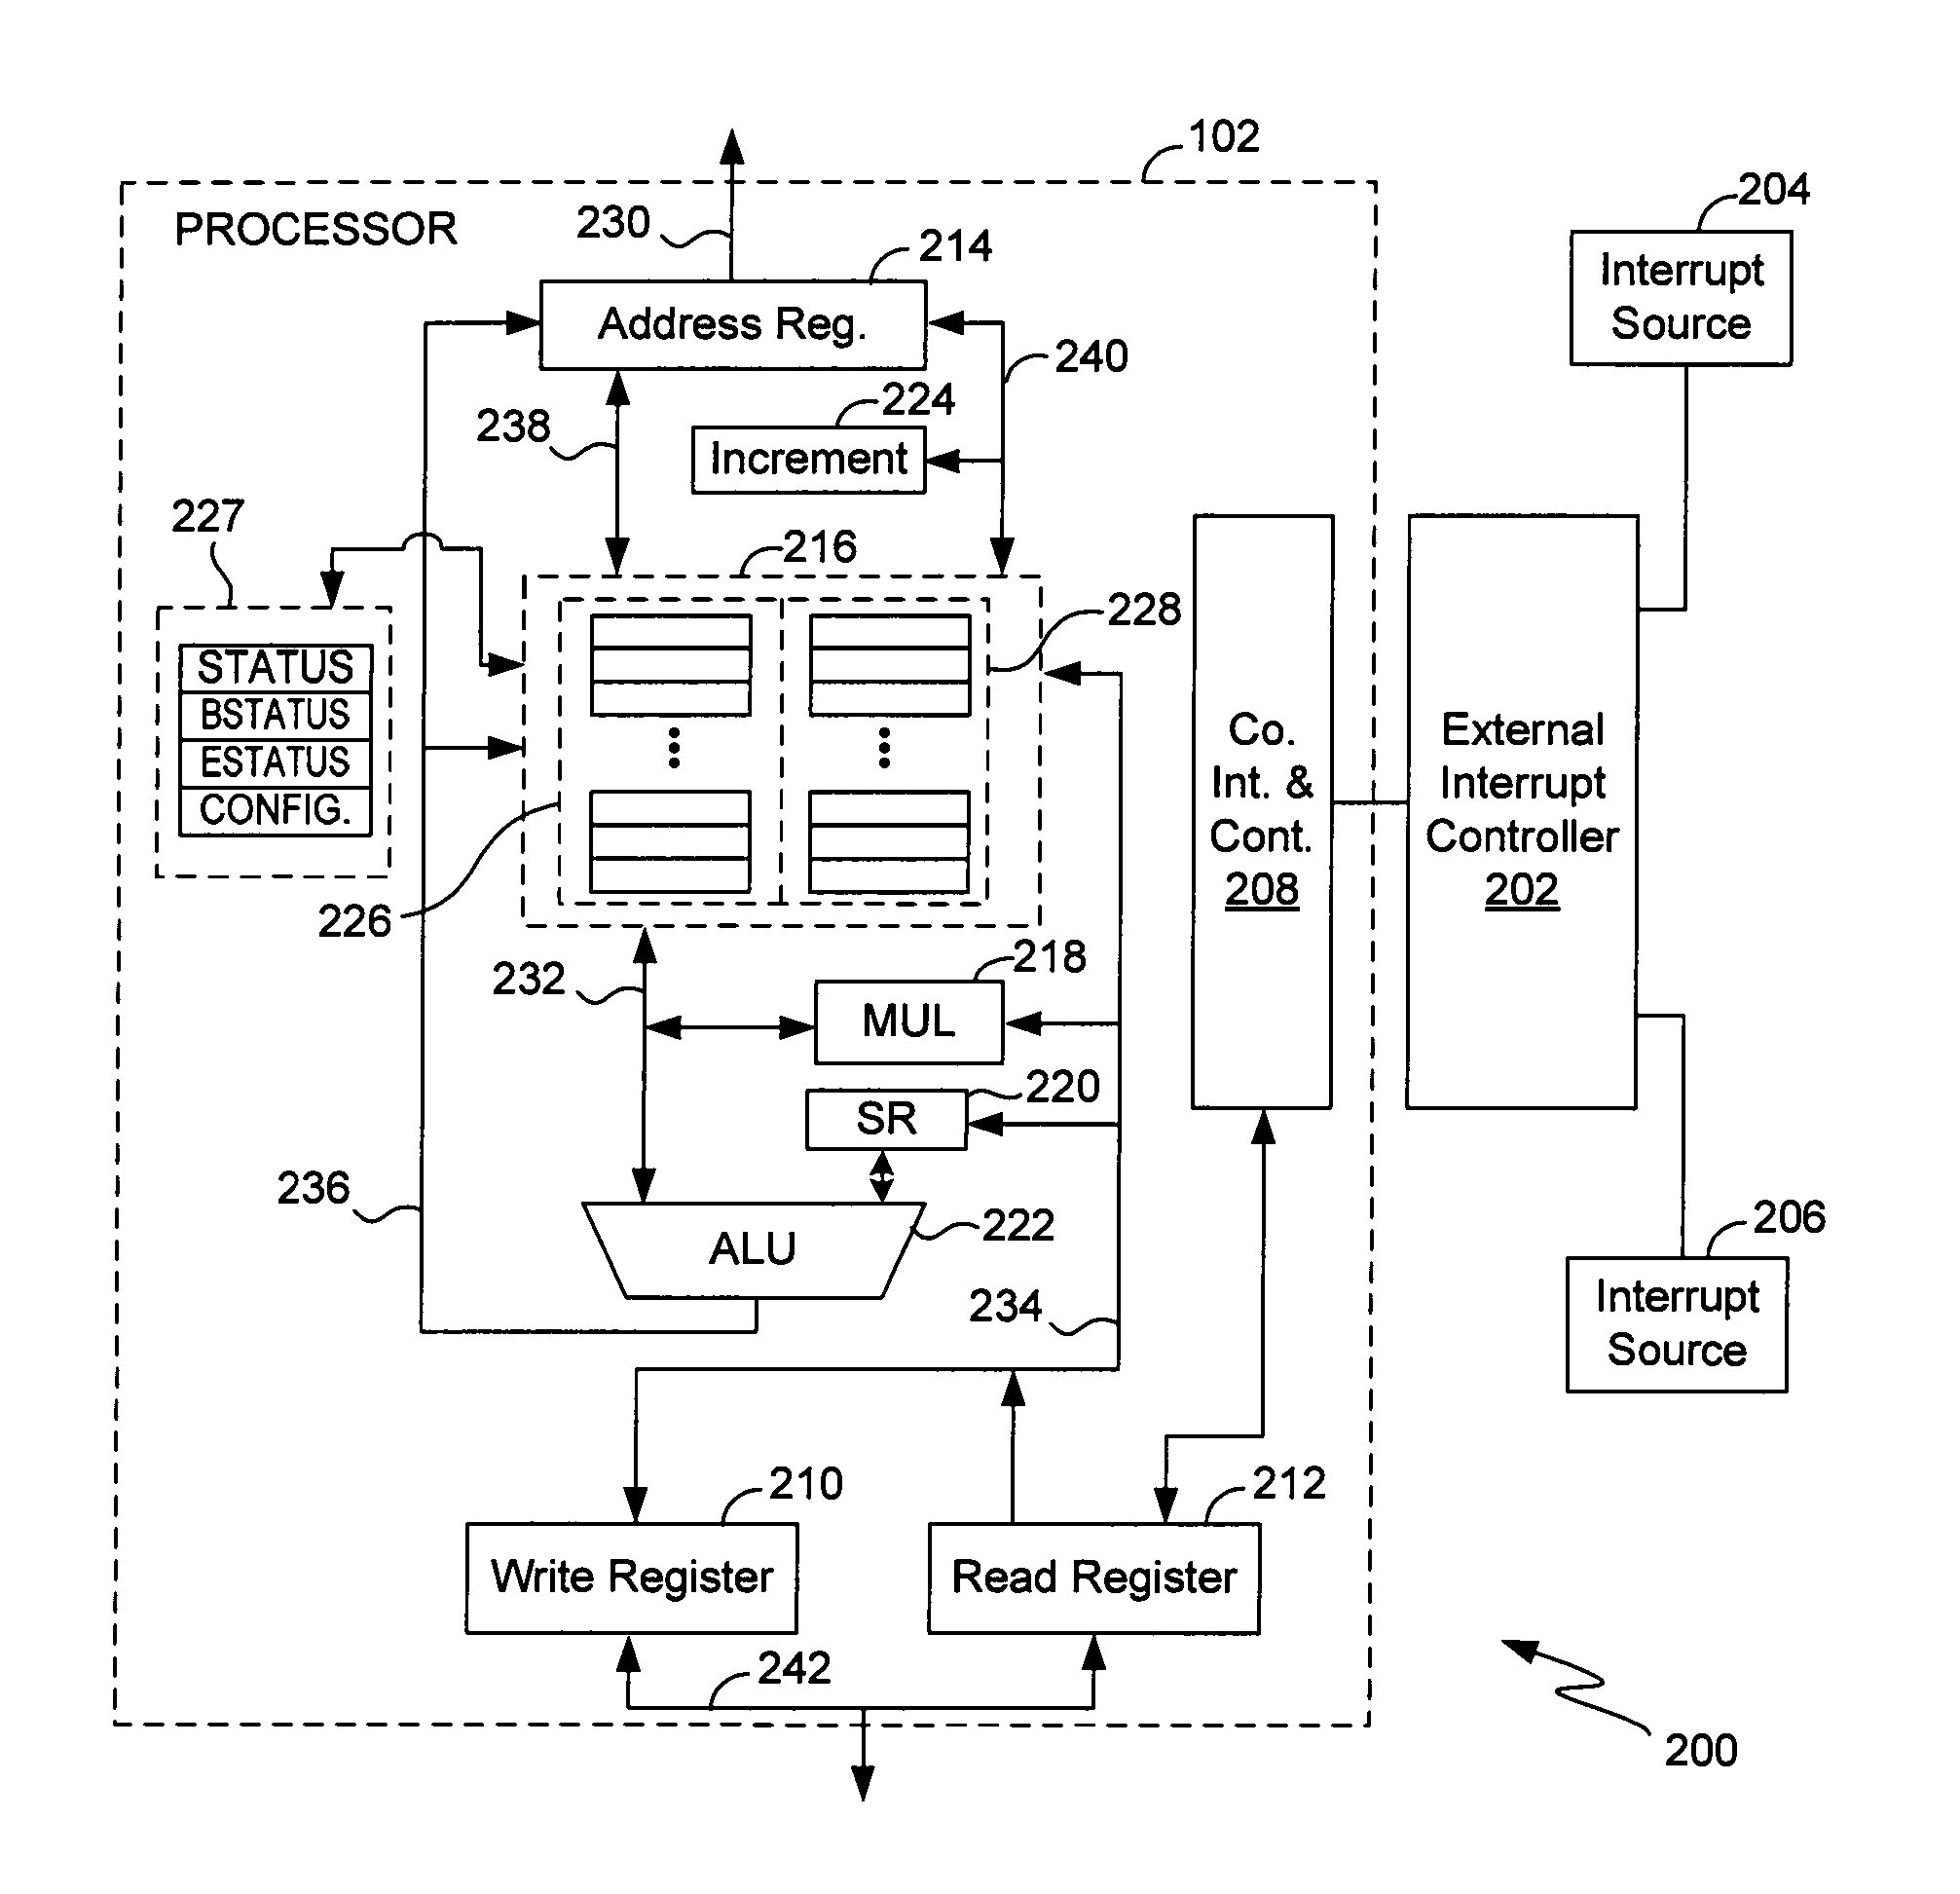 Methods and systems for reducing interrupt latency by using a dedicated bit